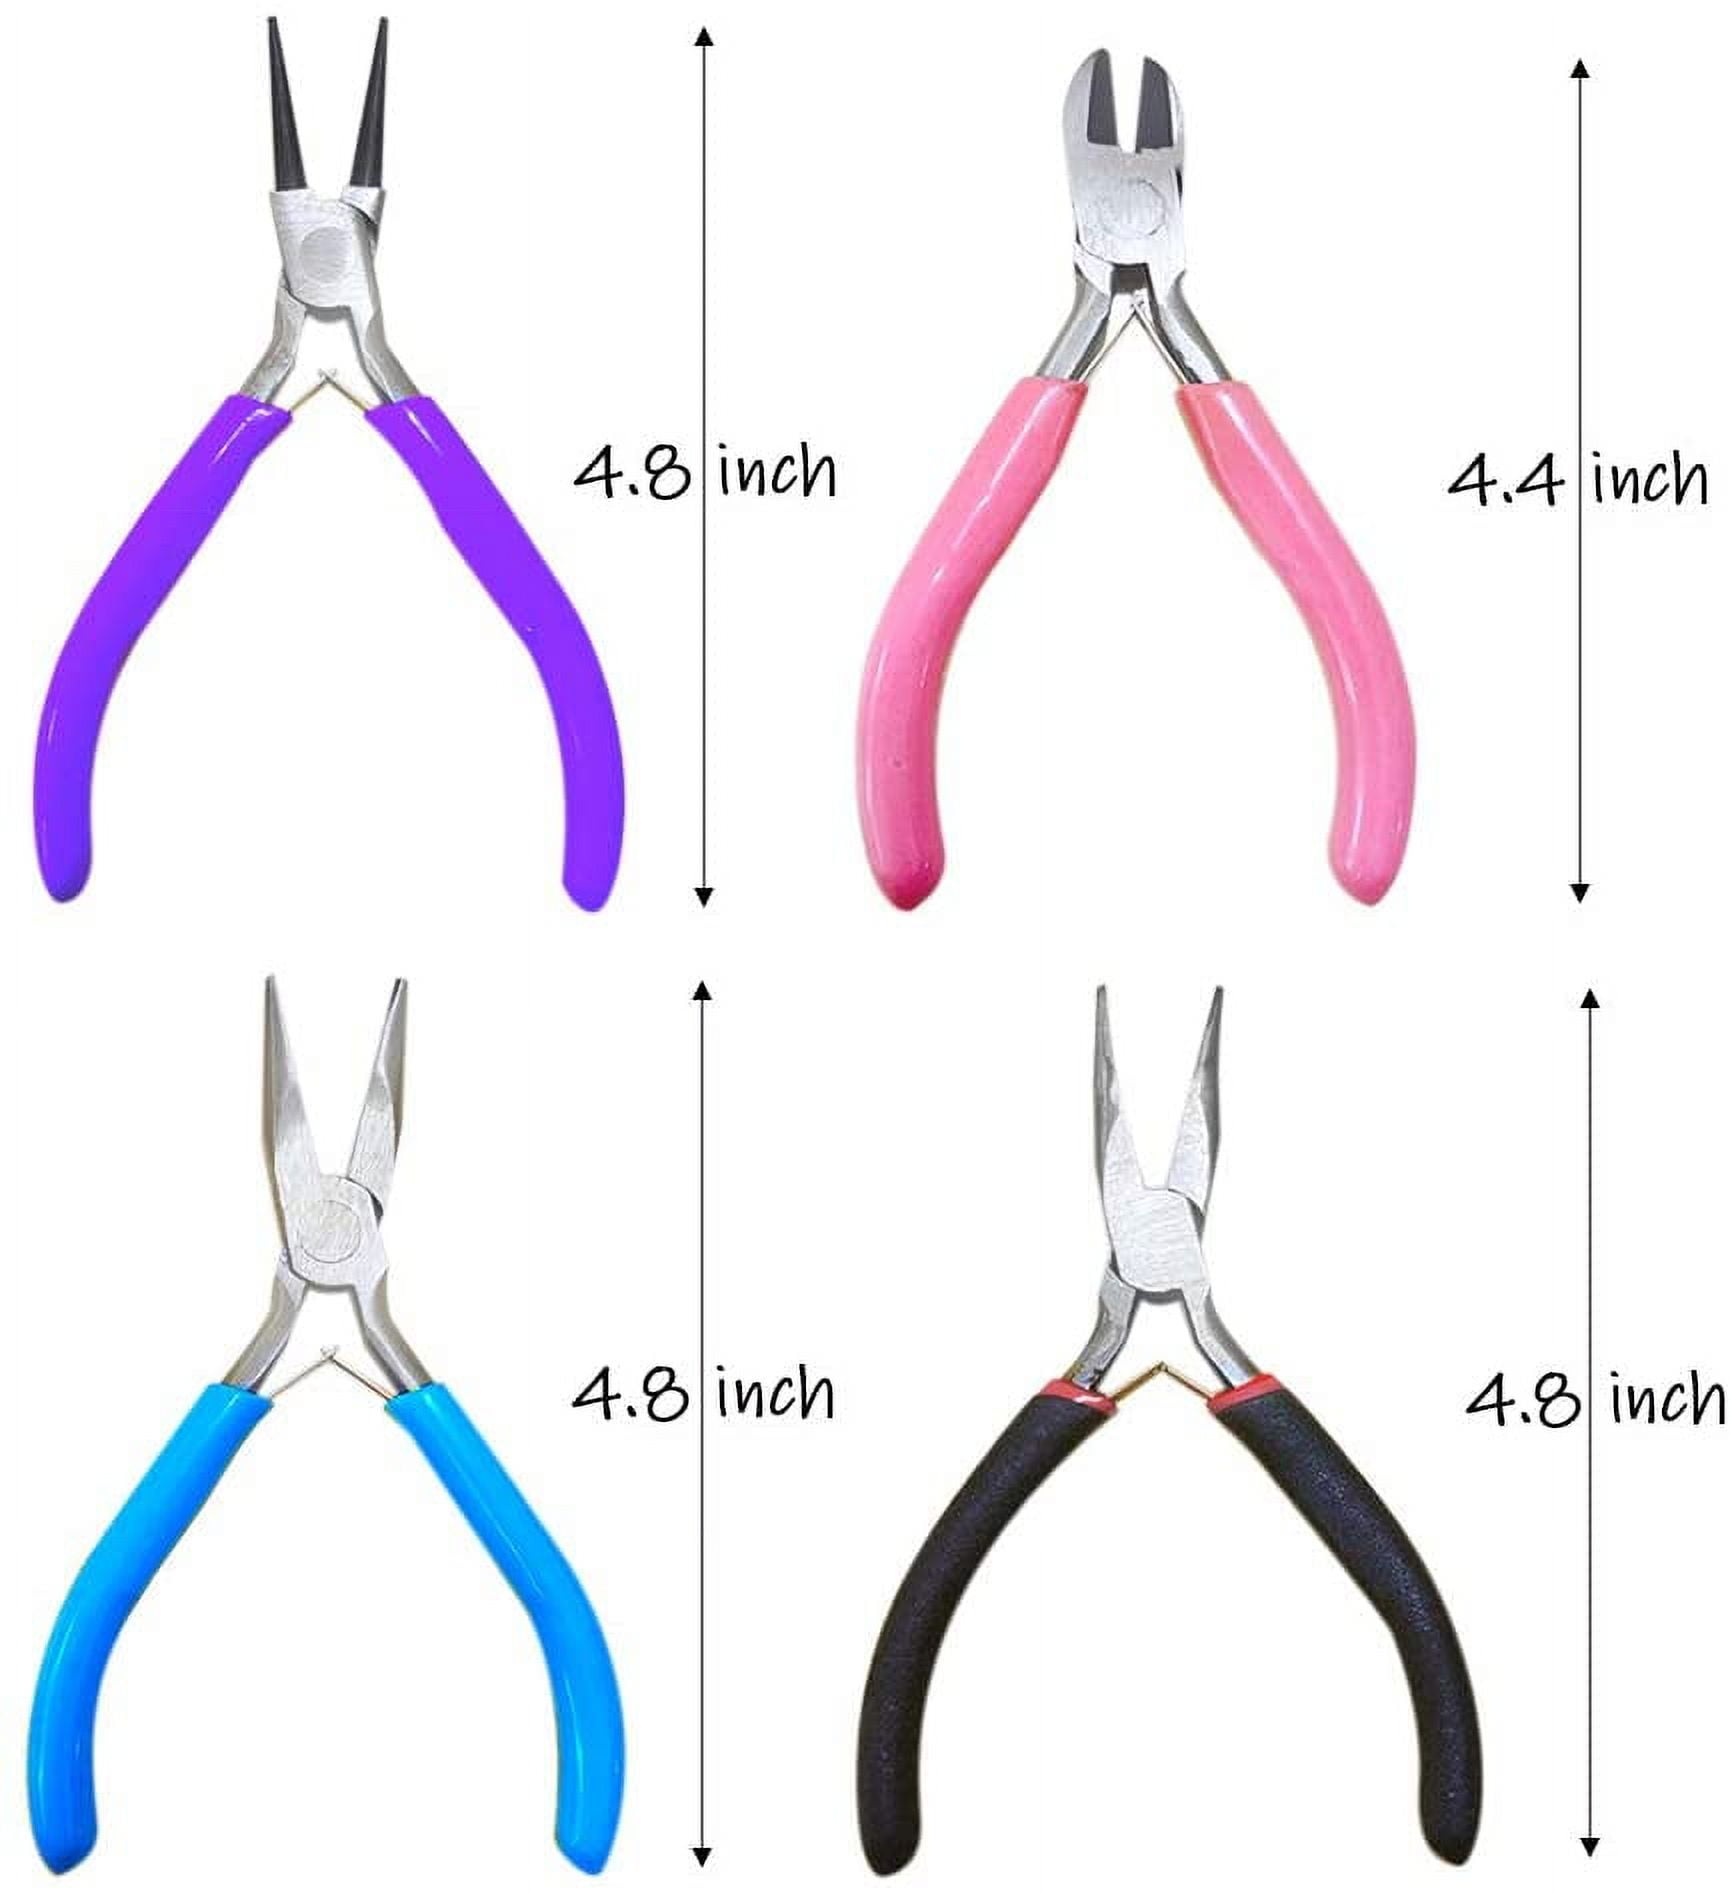 4 Pack Jewelry Pliers Jewelry Making Pliers Tools Kit with Needle Nose  Pliers/Chain Nose Pliers, Round Nose Pliers, Bent Nose Pliers, Wire Cutters  for